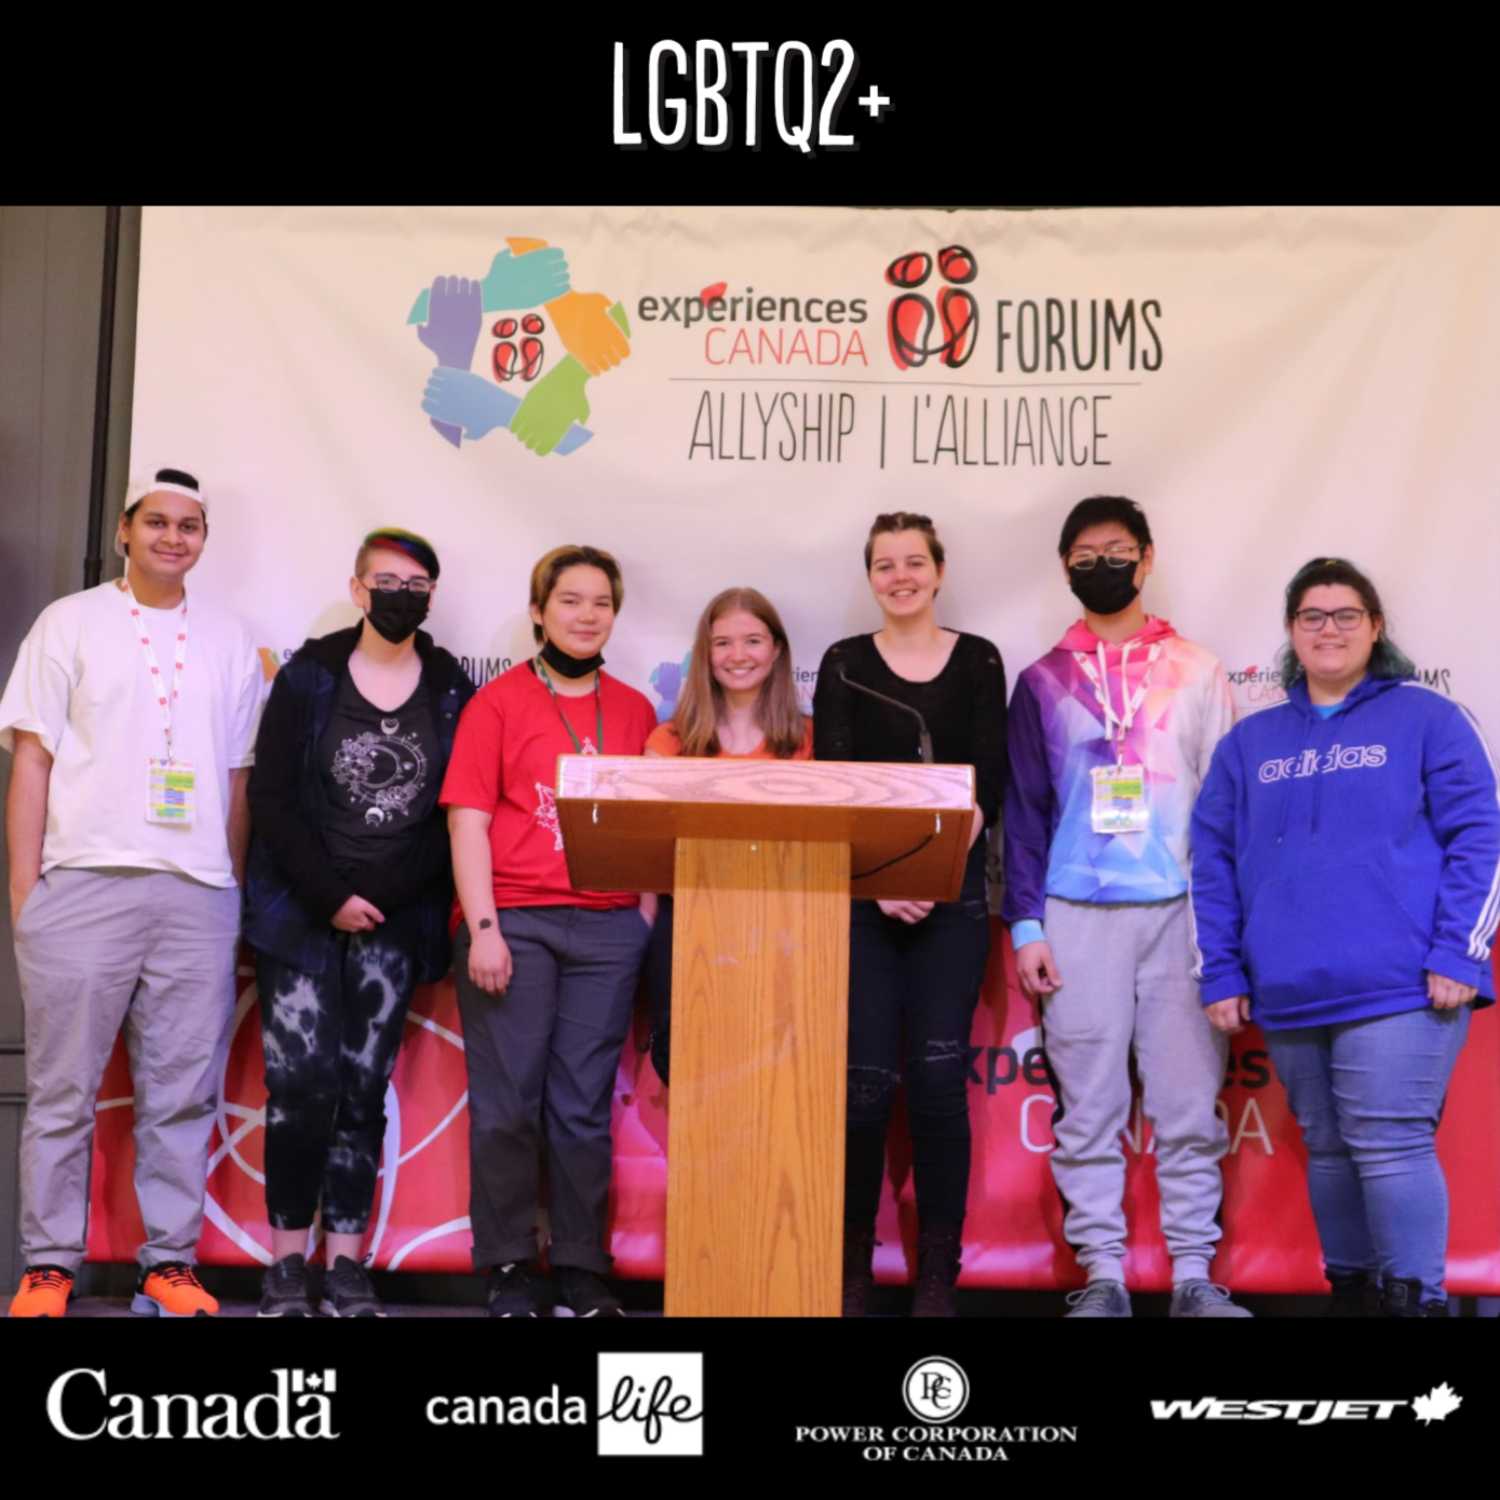 The Criminalization, Victimization and Discrimination of 2SLGBTQ+ People in Canada and the World